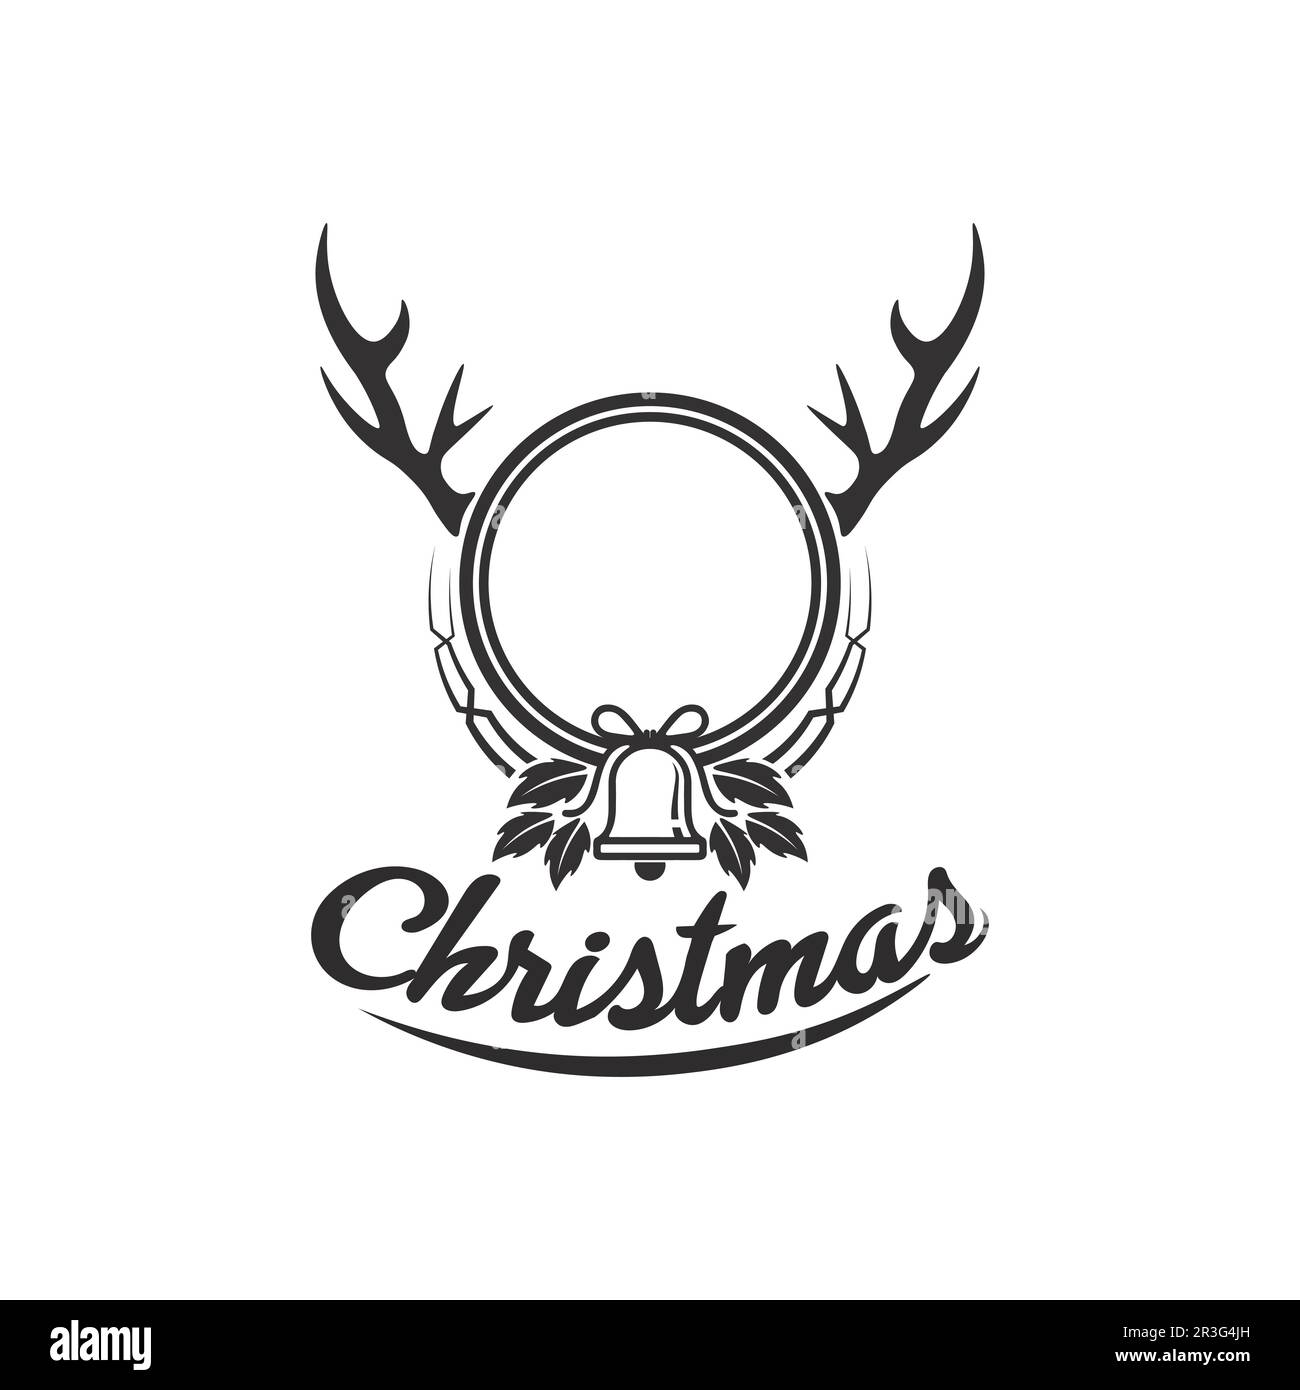 christmas logo and symbol illustration image icon vector design and ...